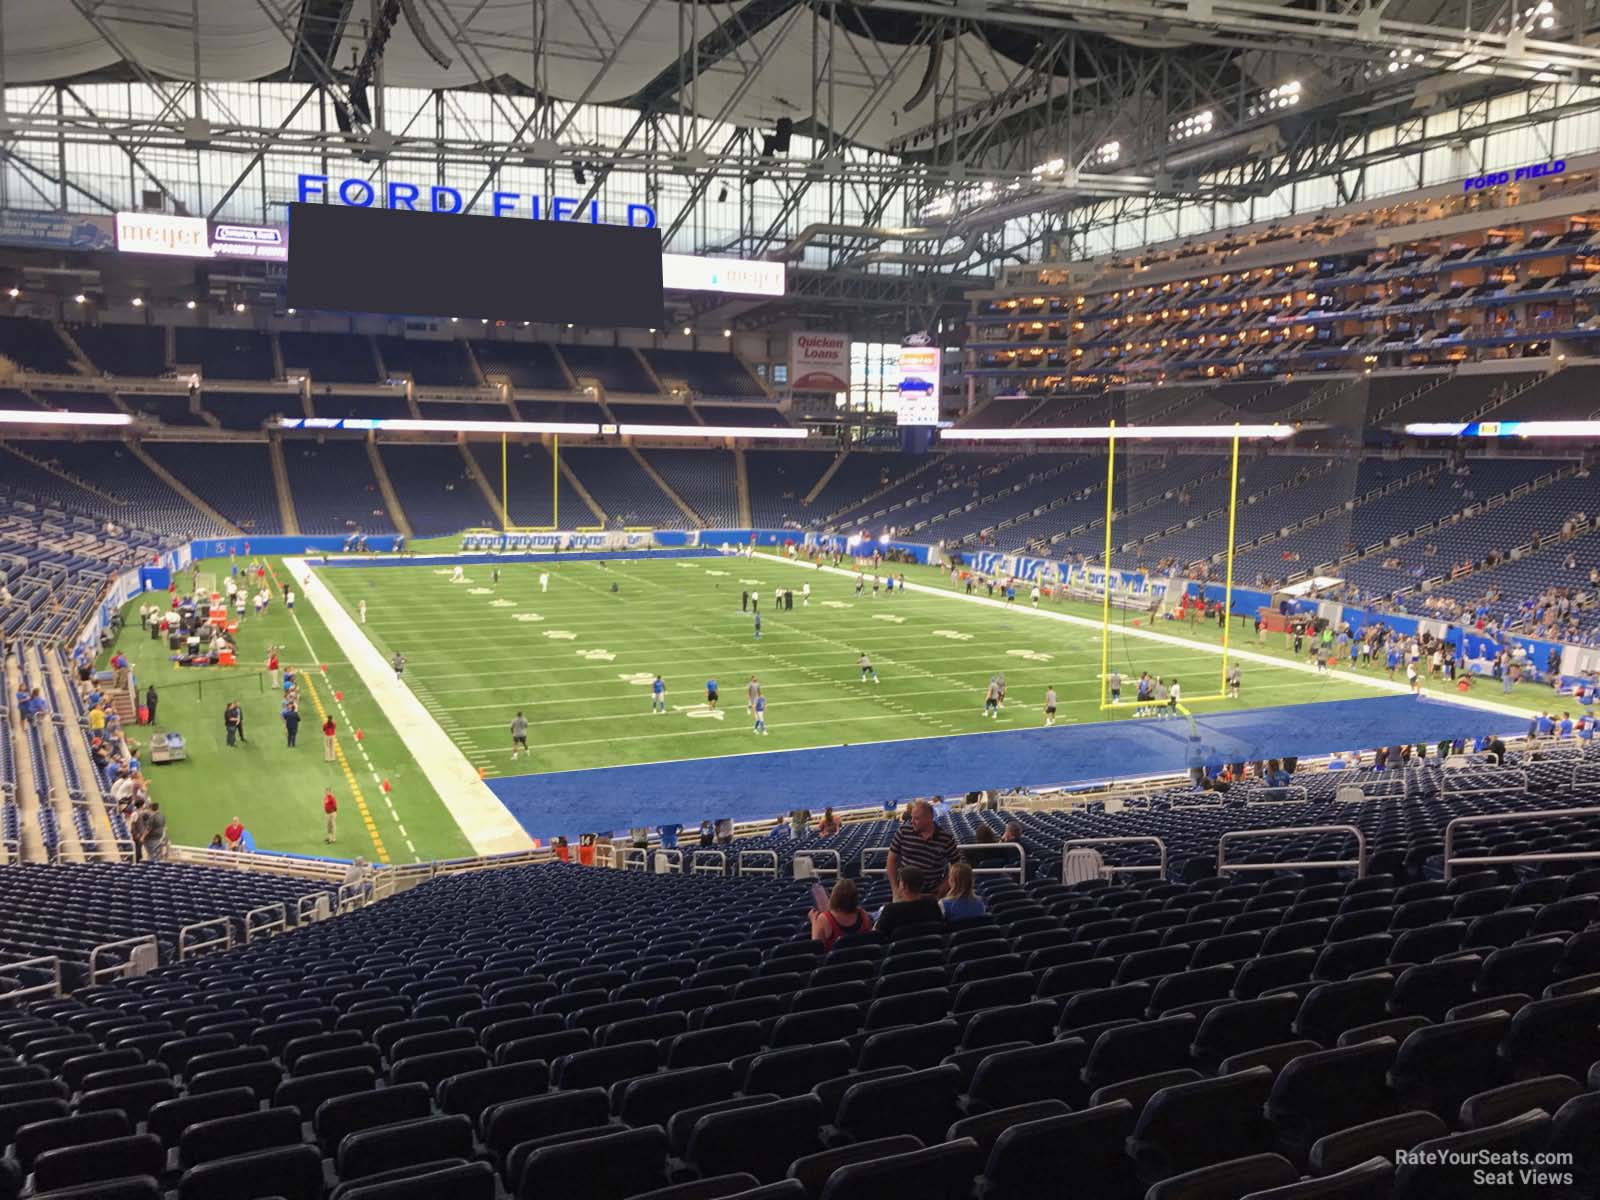 section 135, row 33 seat view  for football - ford field